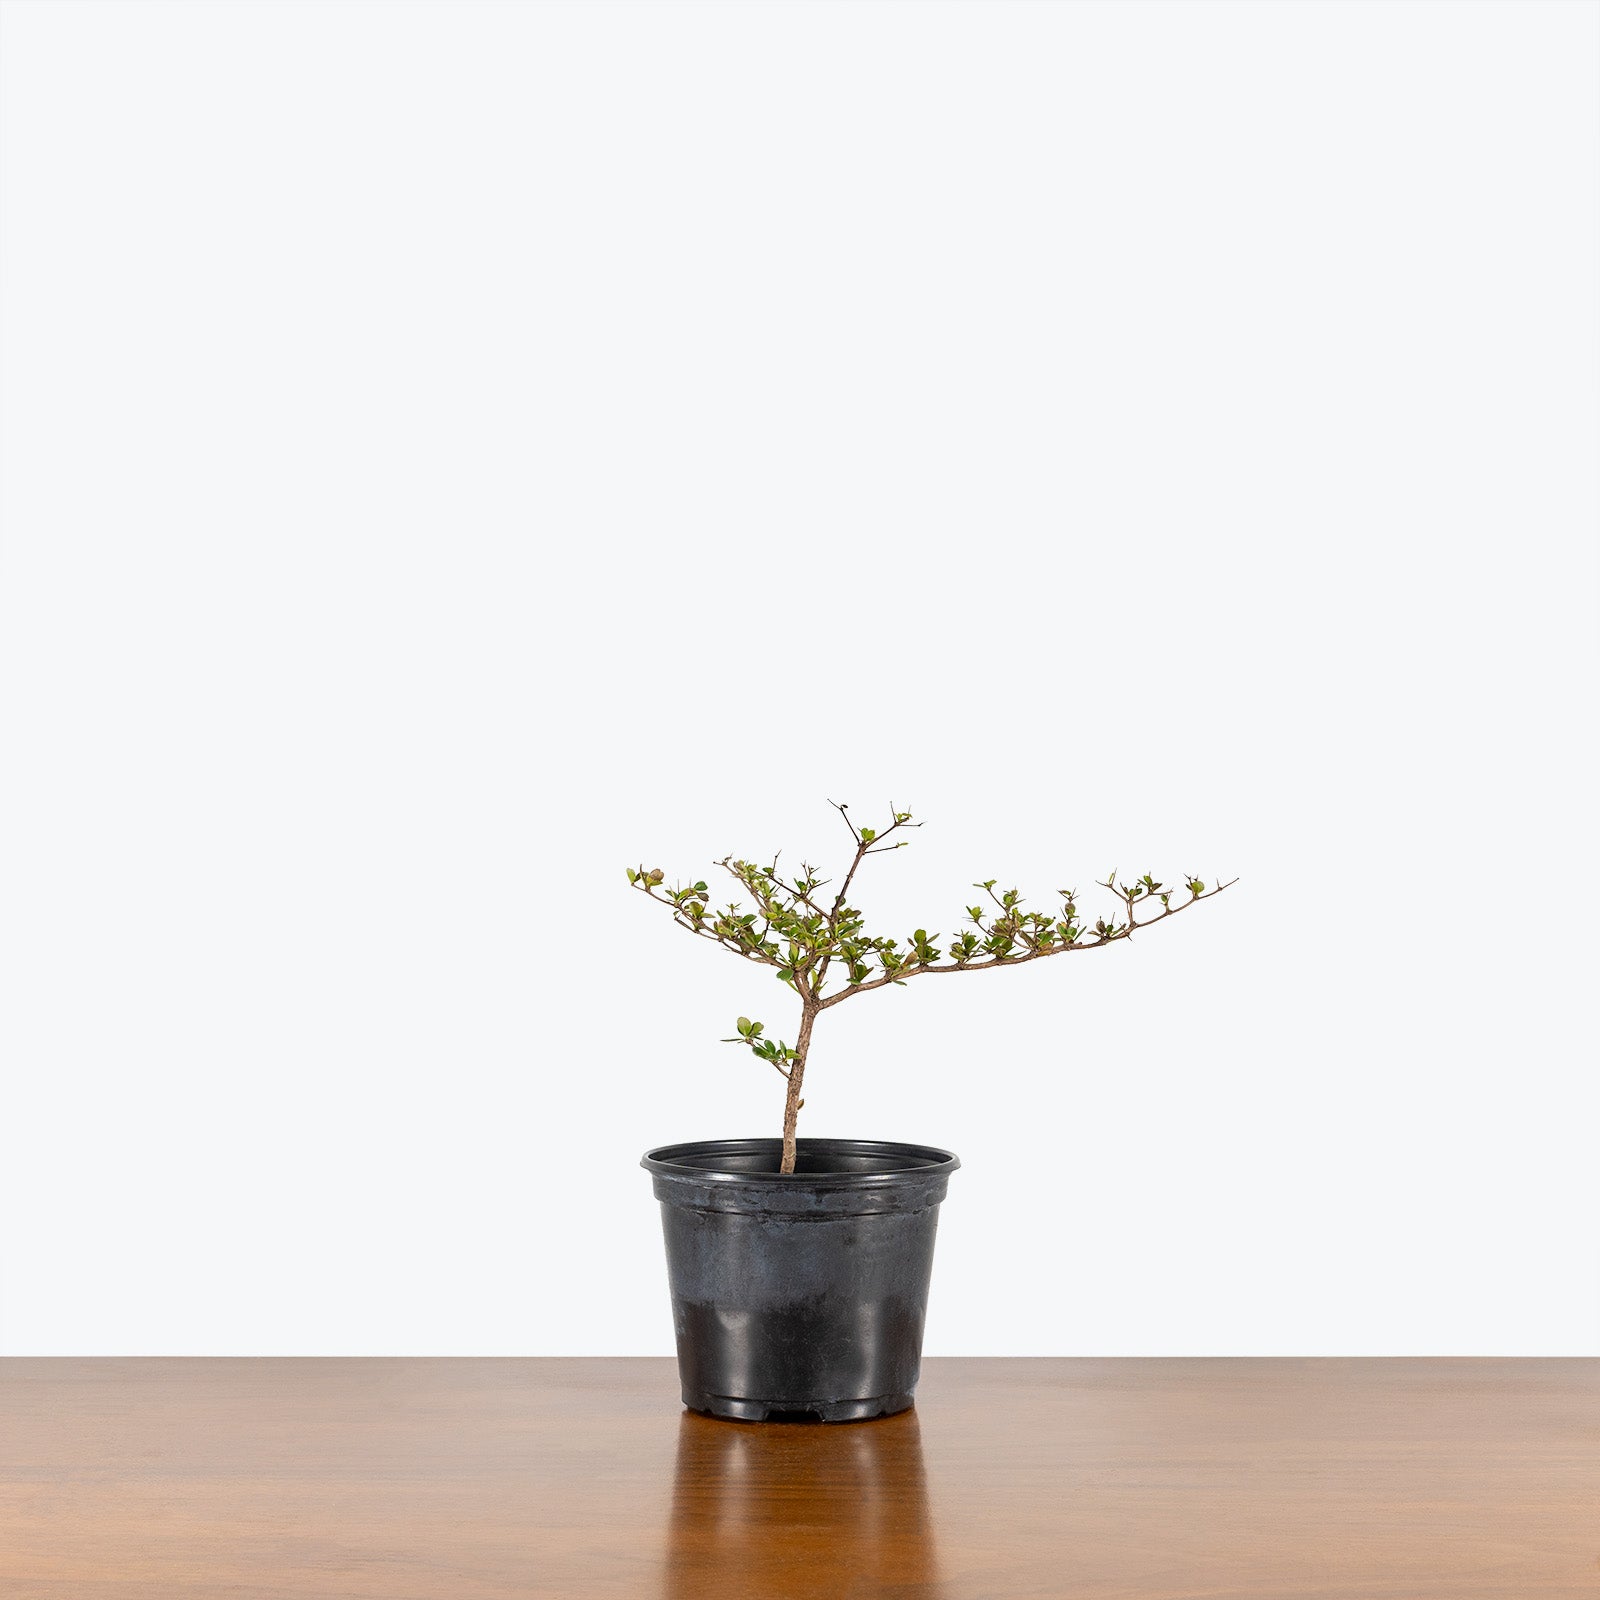 Dwarf Black Olive Bonsai | Care Guide and Pro Tips - Delivery from Toronto across Canada - JOMO Studio